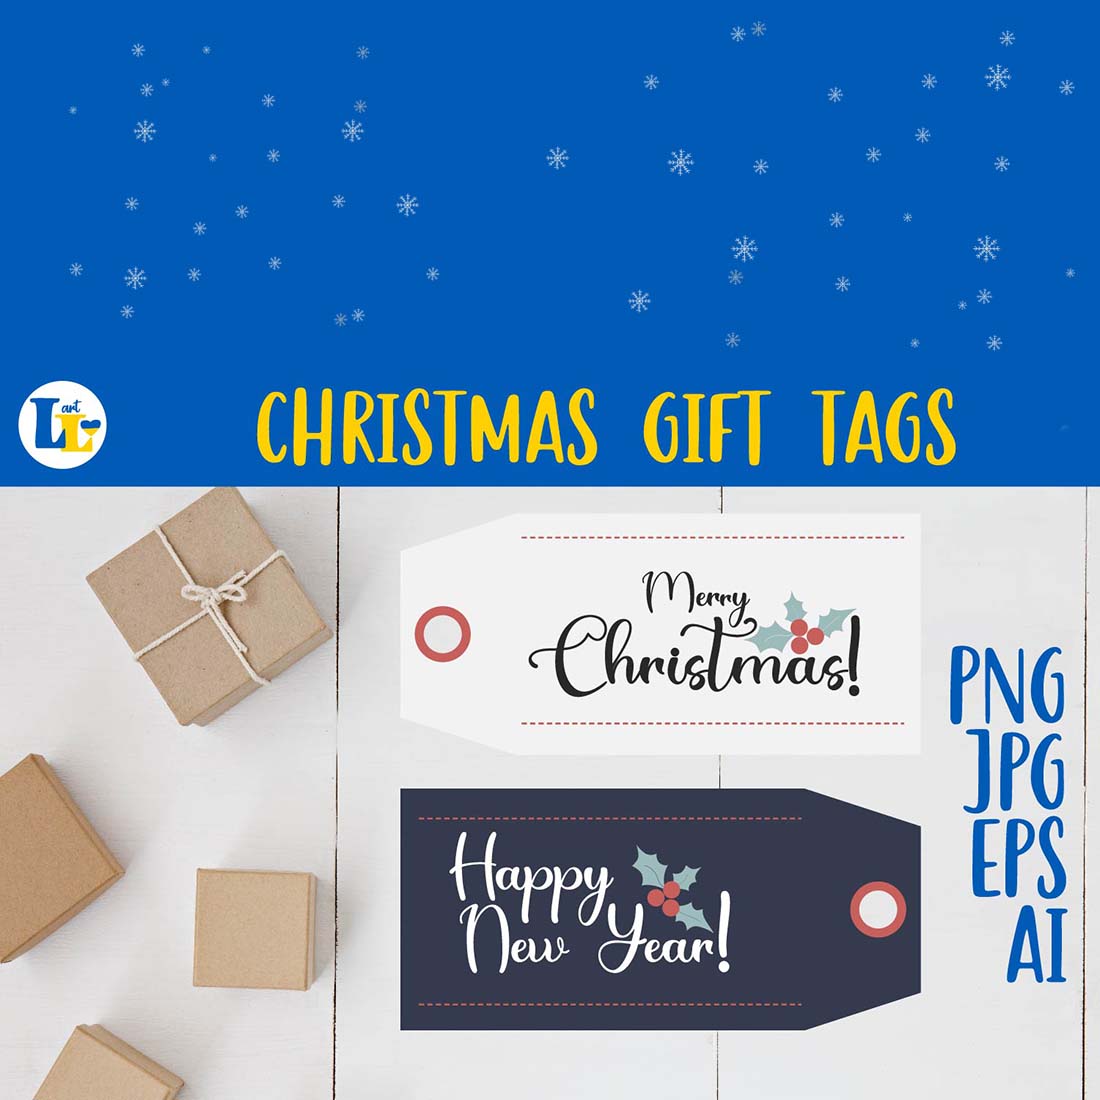 Merry Christmas and New Year Gift Tags cover image.